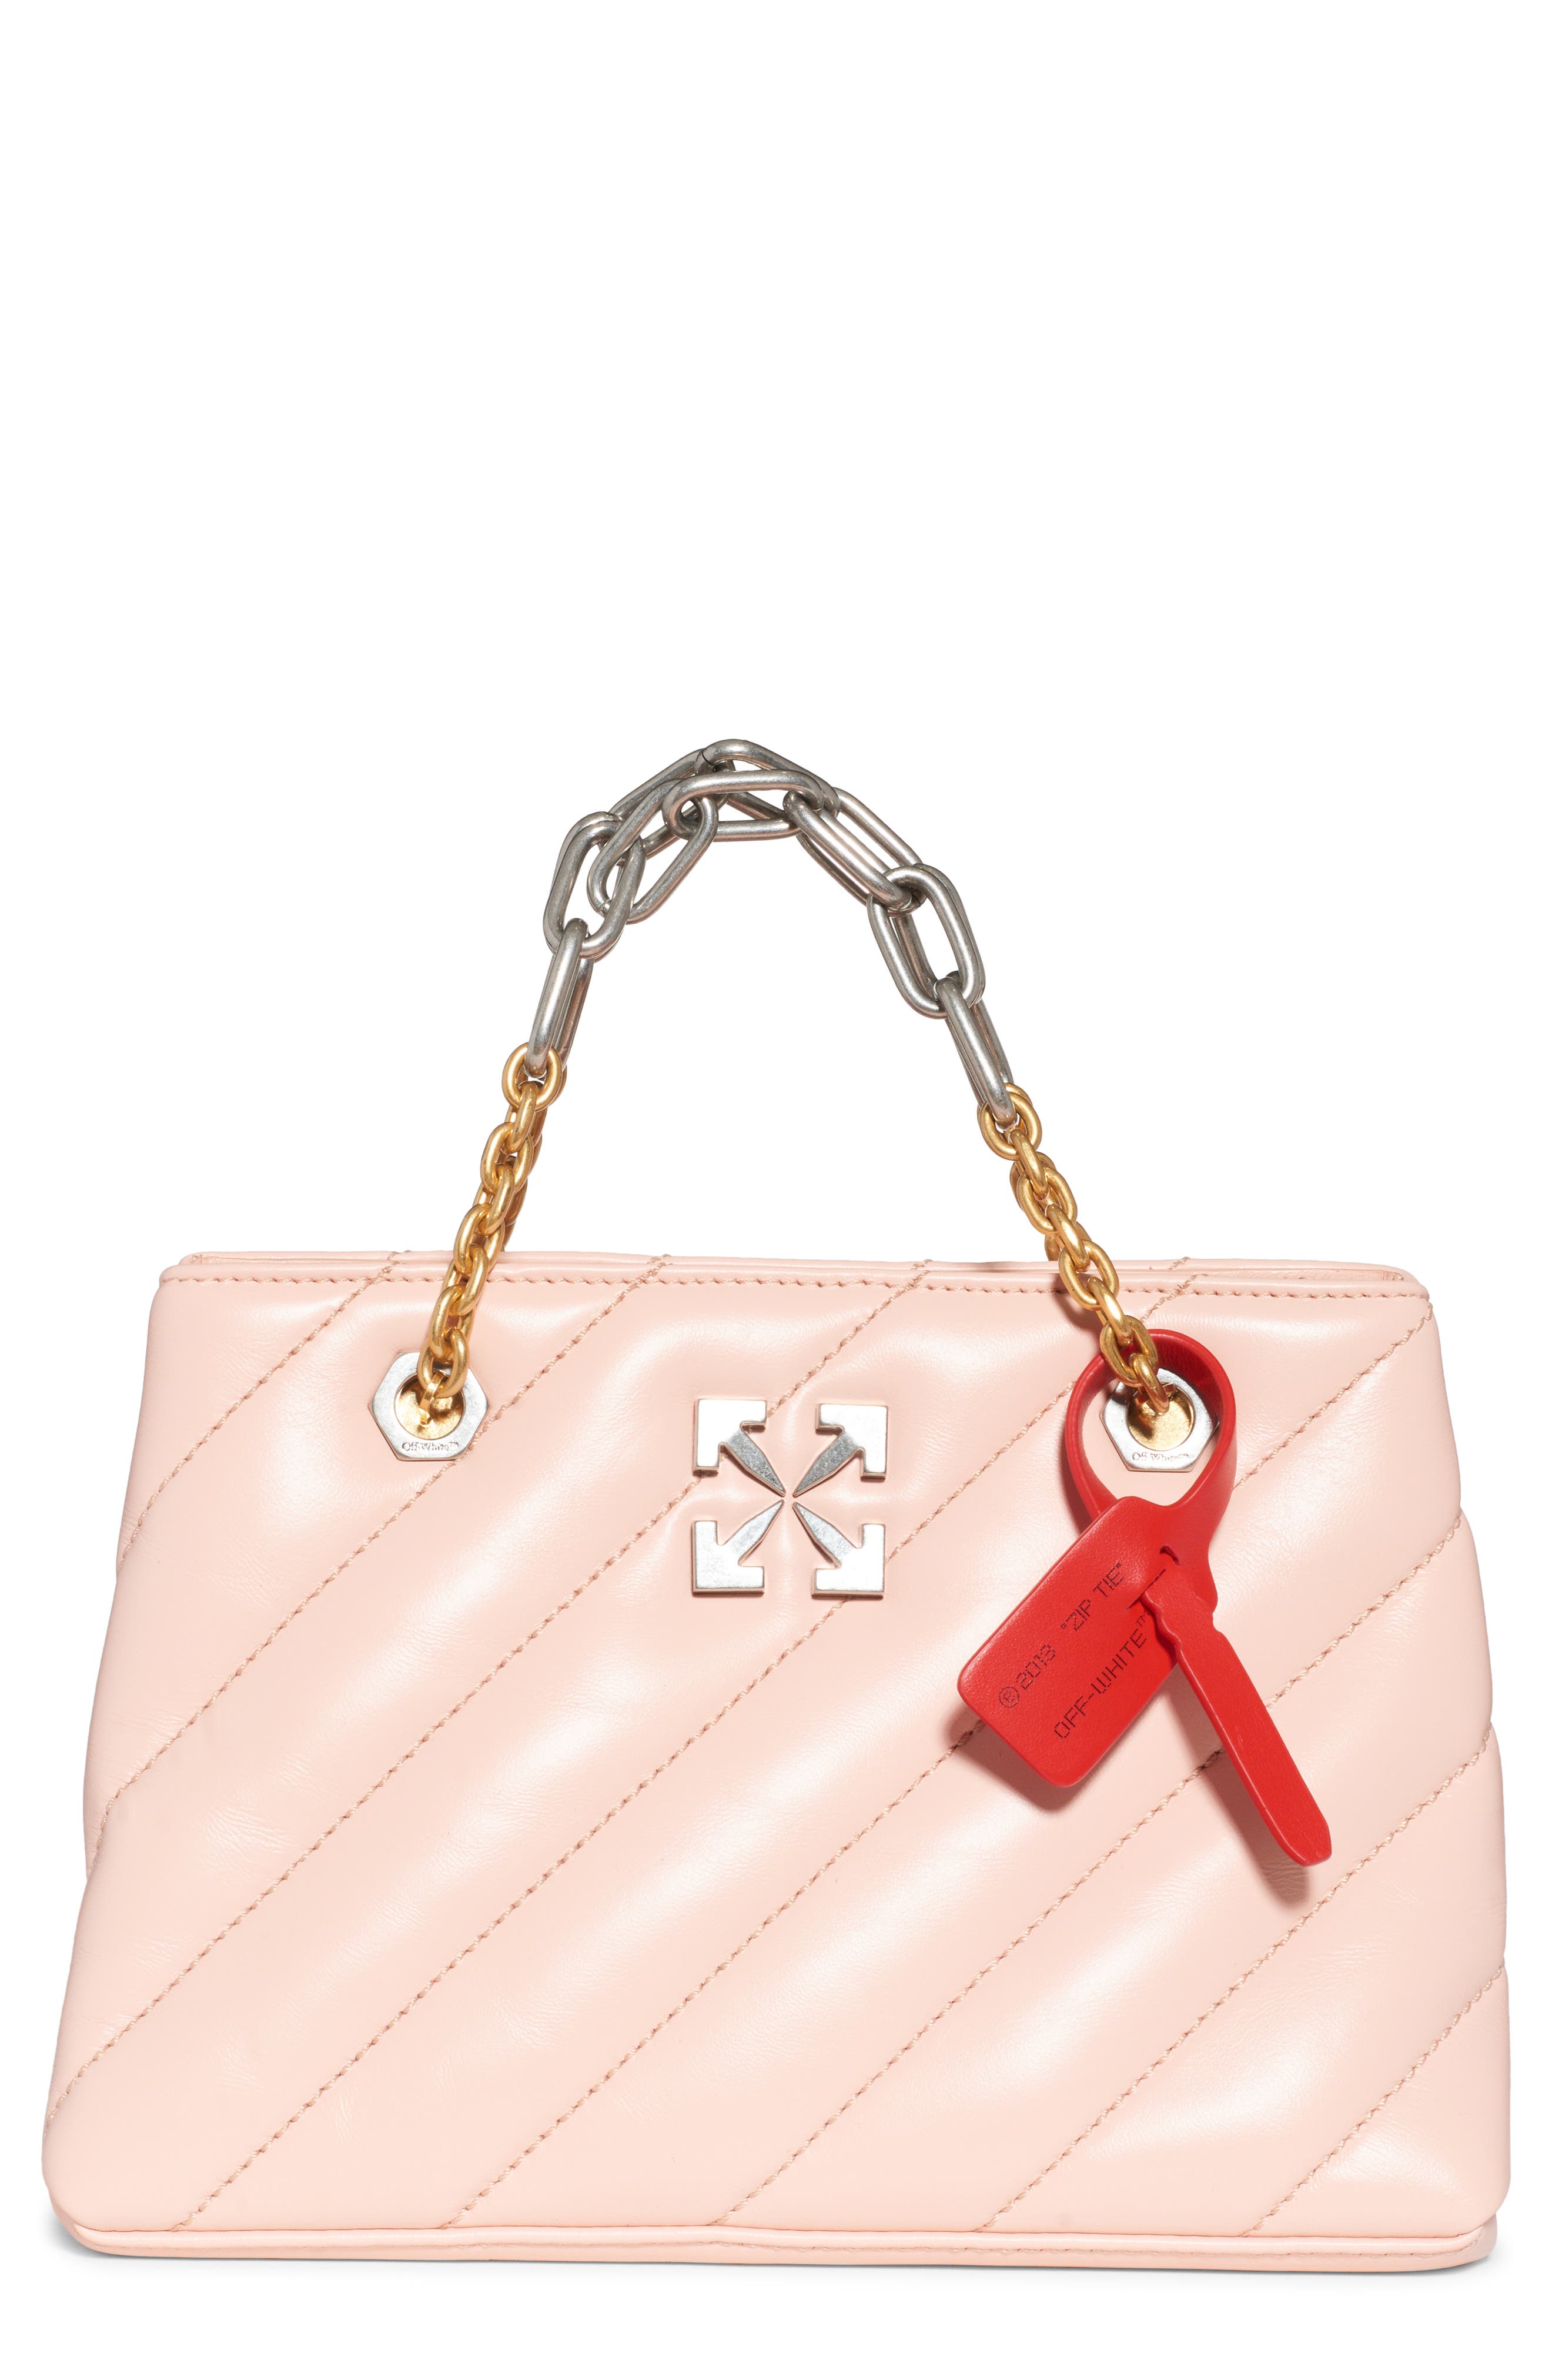 Off-White Jackhammer Leather Tote in Pink